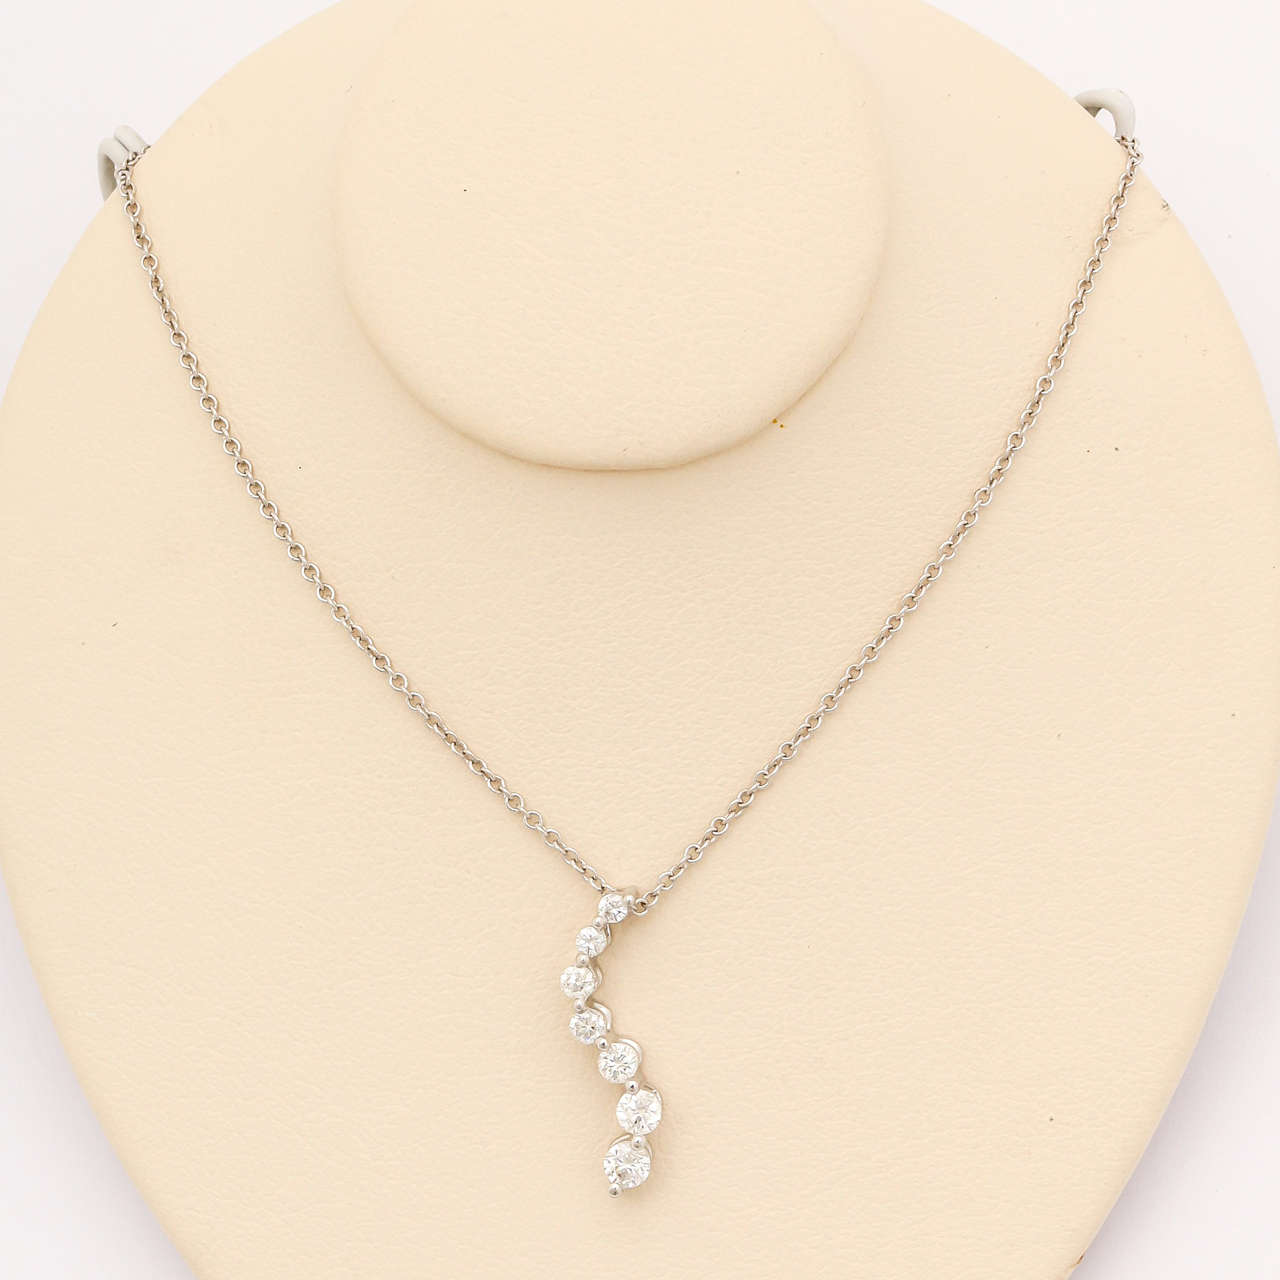 Symbolizing 'Love's Journey',the 7 diamonds, graduating from the smallest to largest are arranged in an eye-catching curve.It is made of 14 kt white gold.
The pendant is suspended from a 16 in., 14 kt white gold cable-link chain made in Italy. A